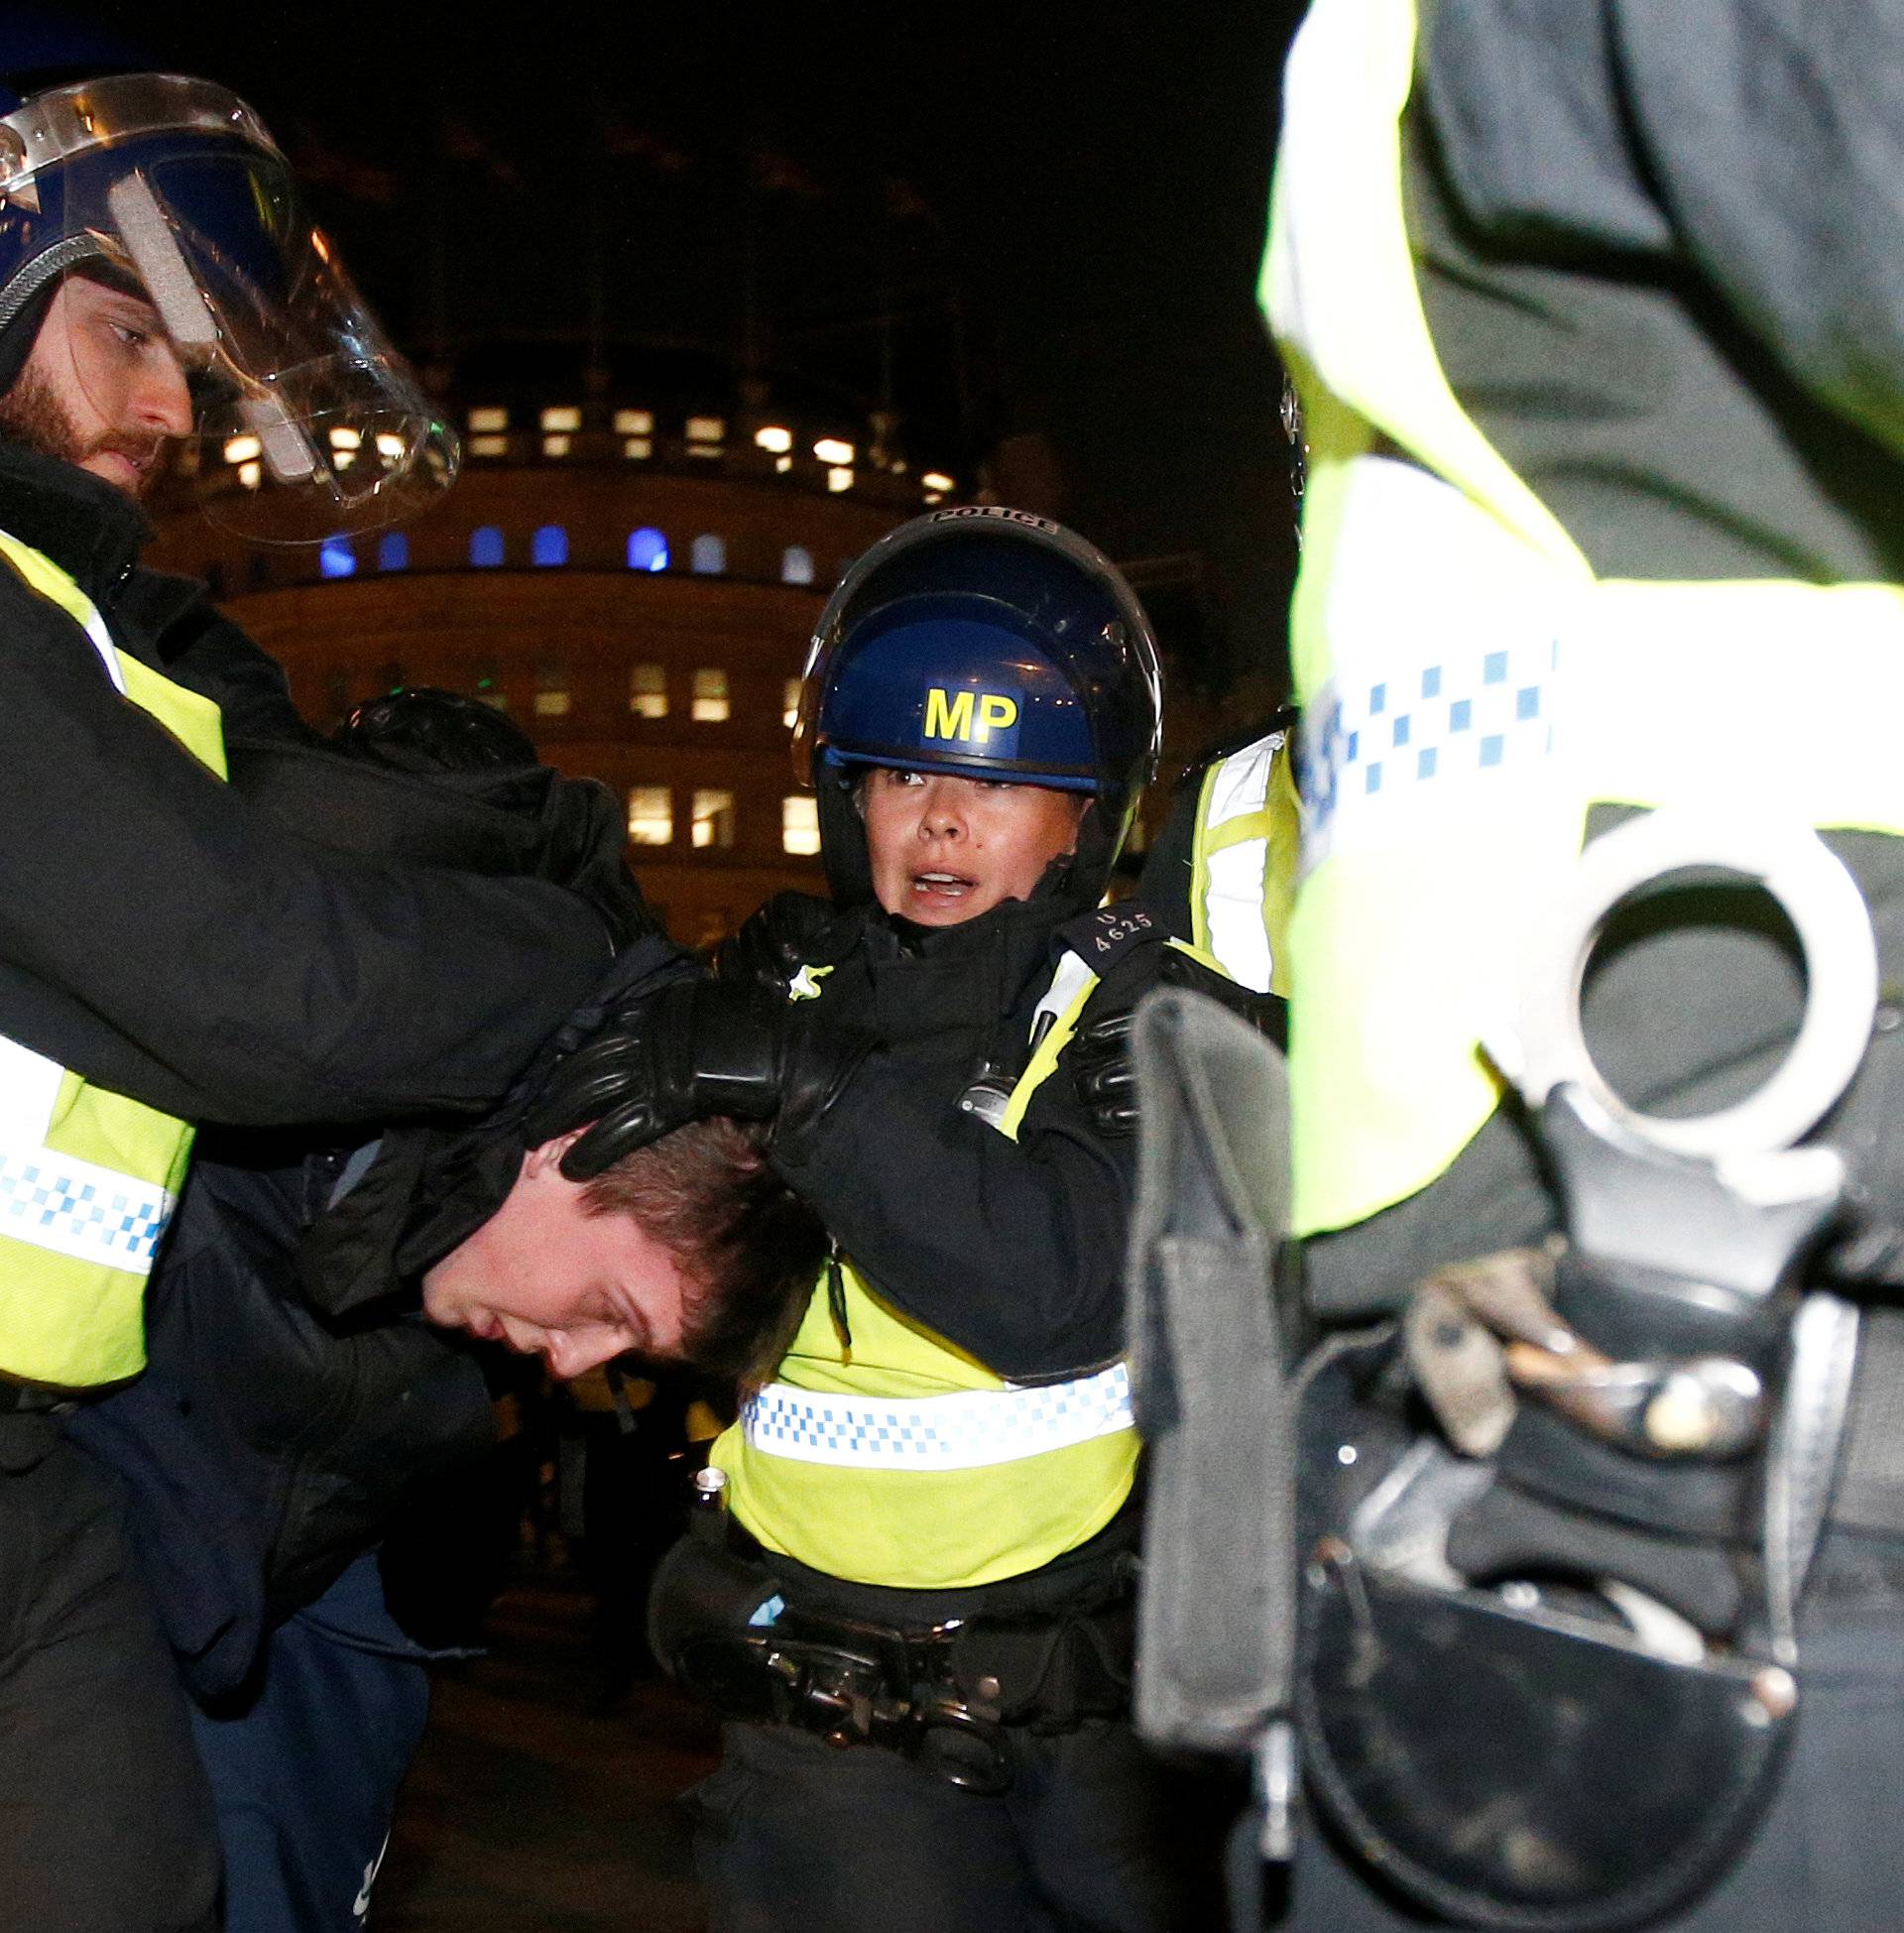 Police officers apprehend a protester during the "Million Mask March" in London